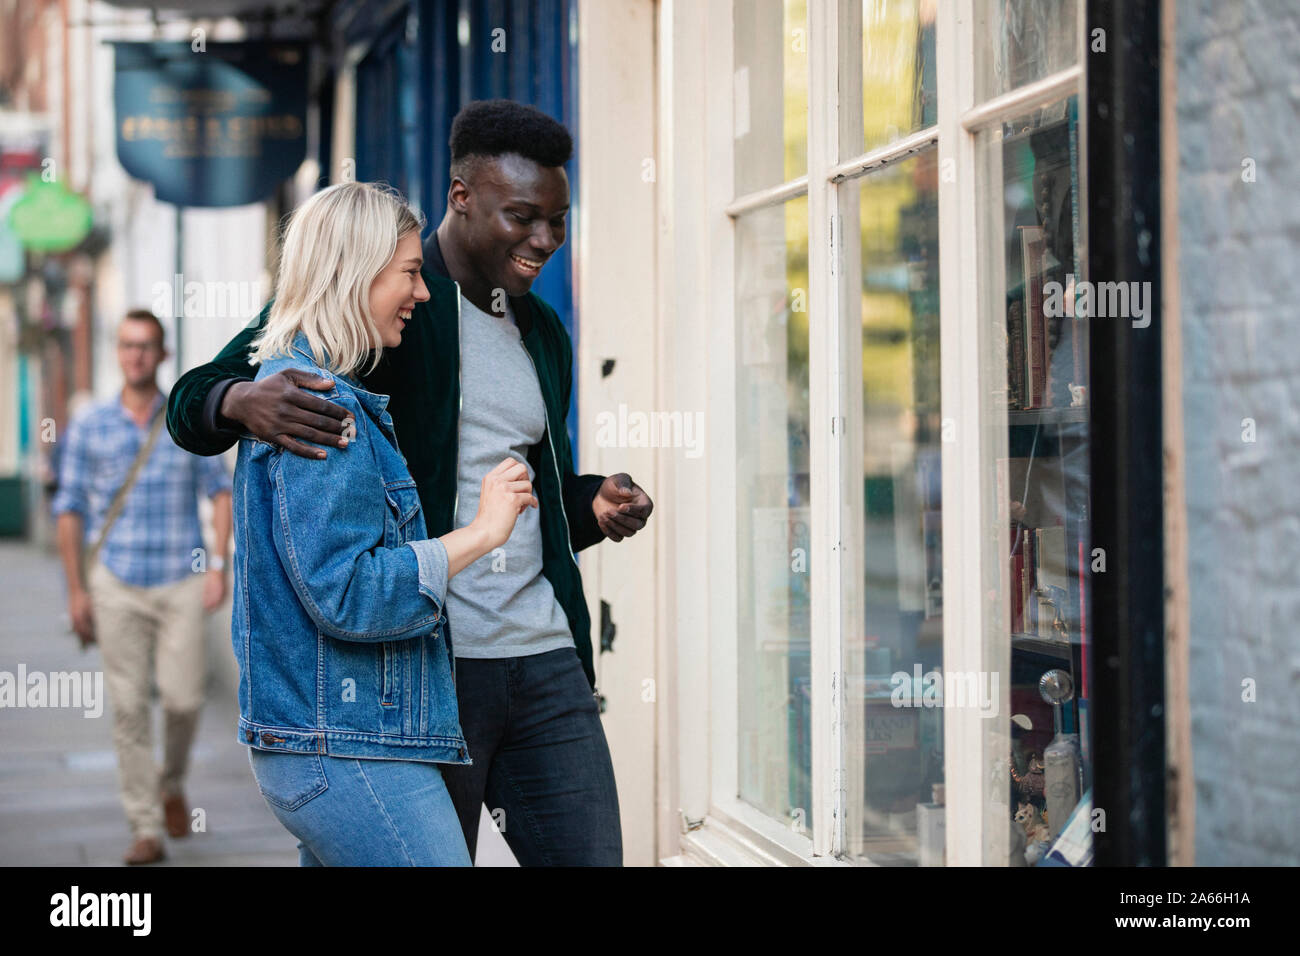 A man and woman standing outside a shop window together, he has his arm around her. Stock Photo